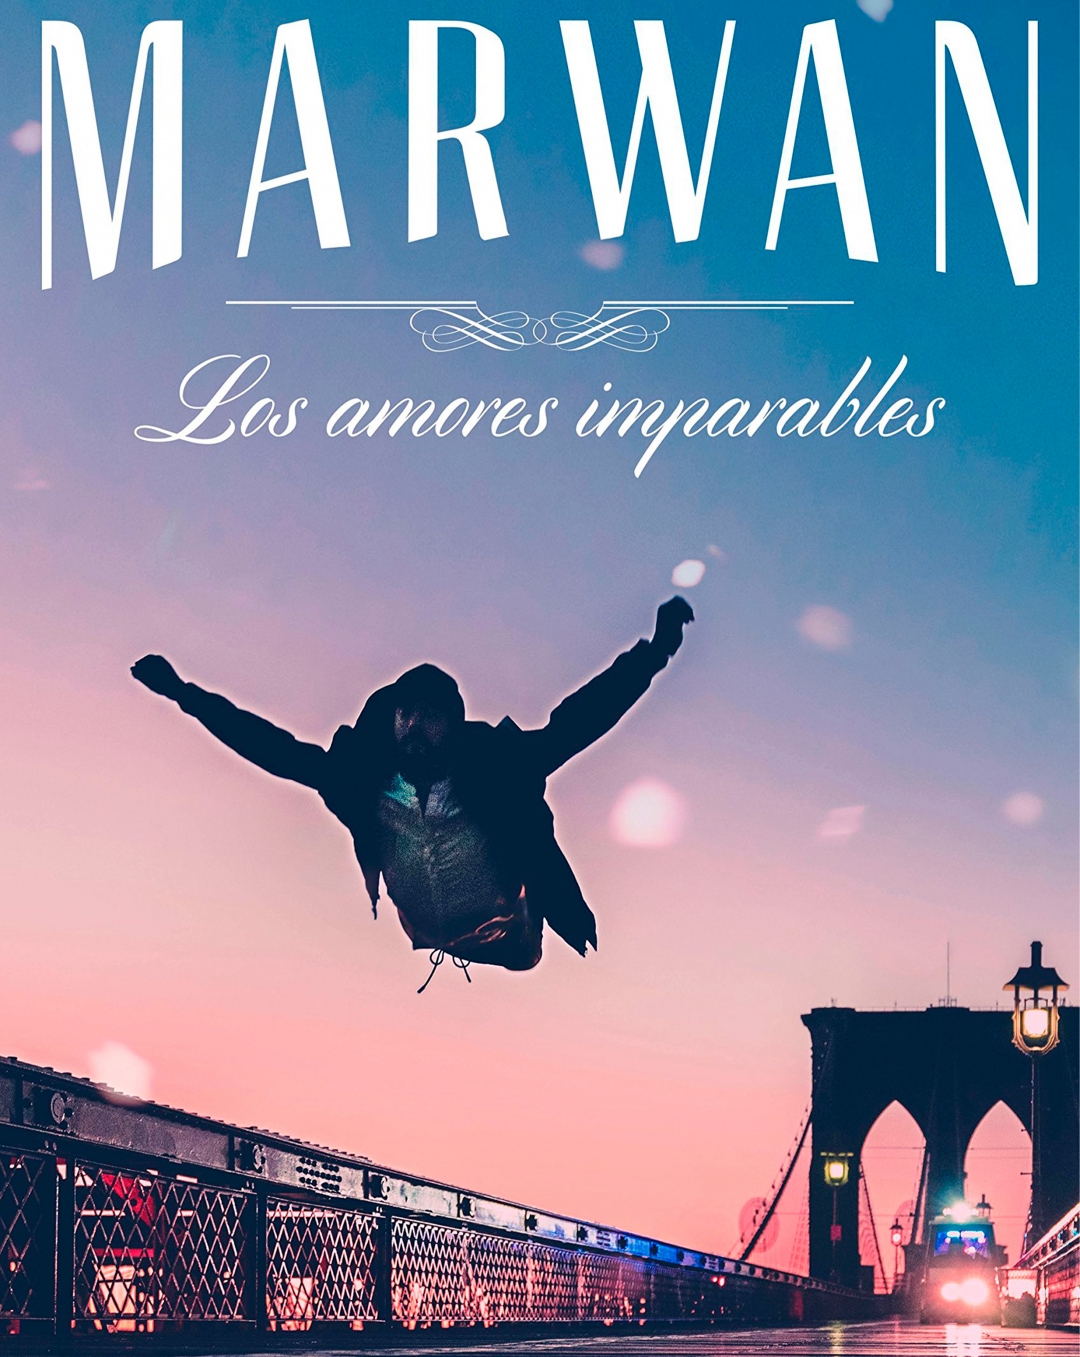 amores inseparables marwan